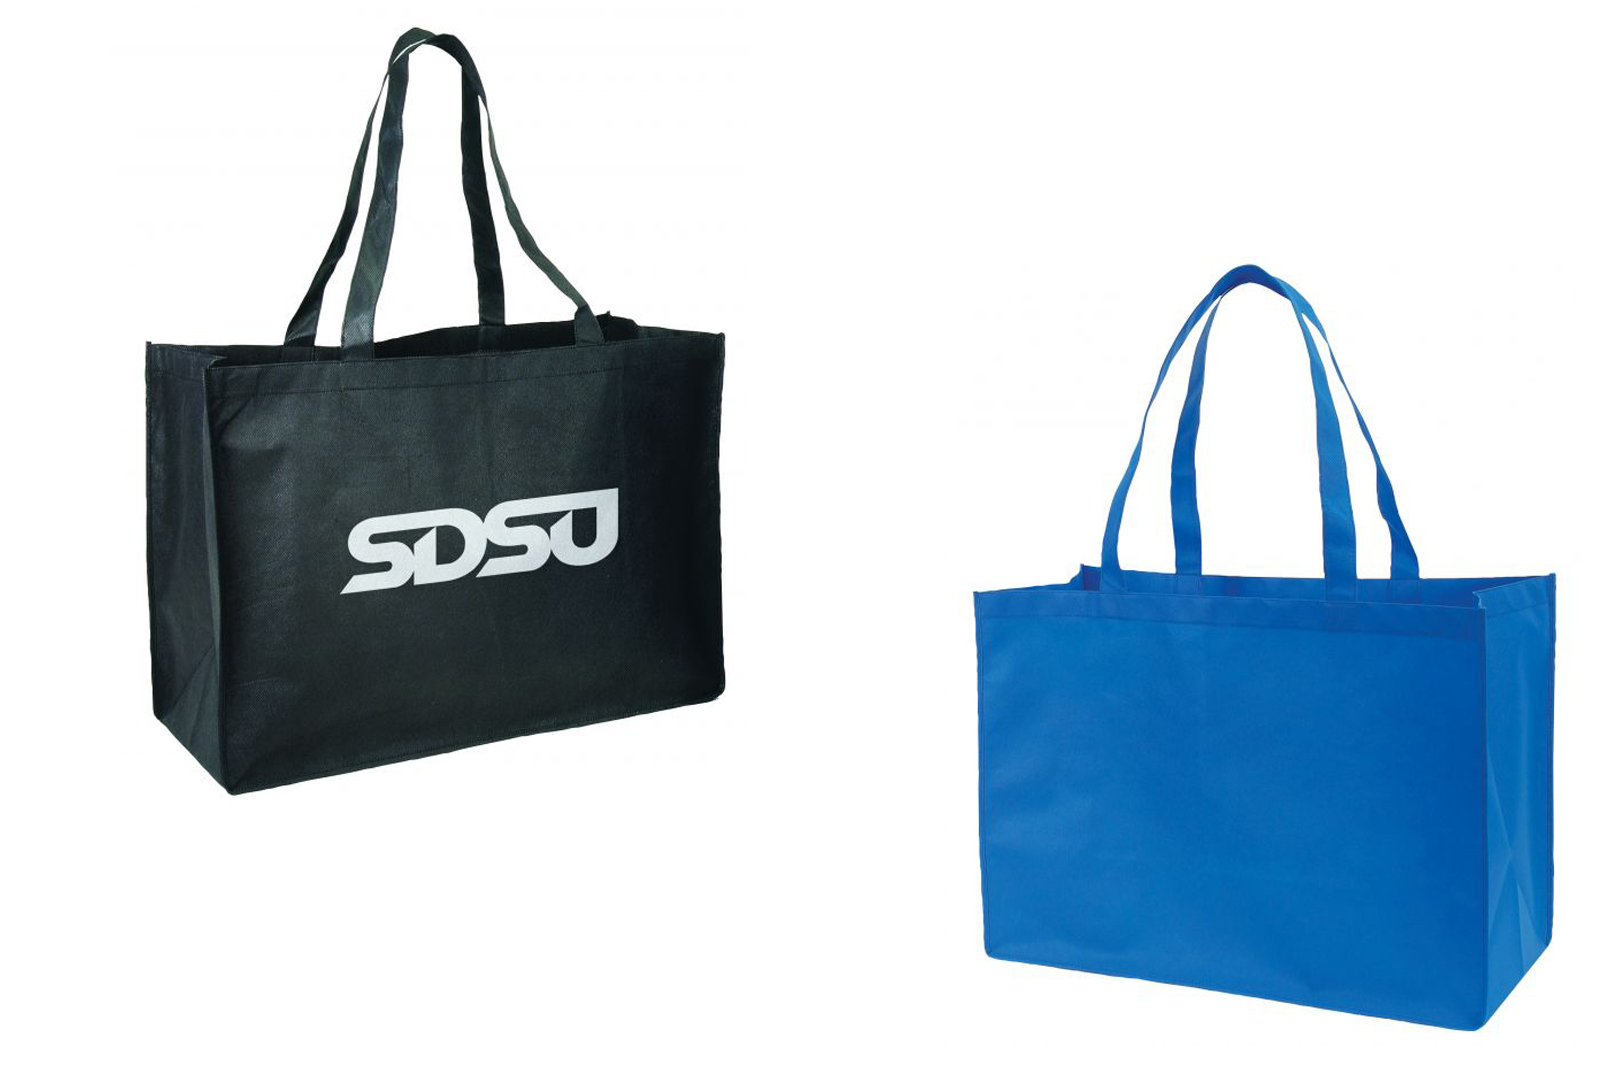 ''13'''' Non-Woven Tote Bags w/ Dual Carrying Handles - Choose Your Color(s)''